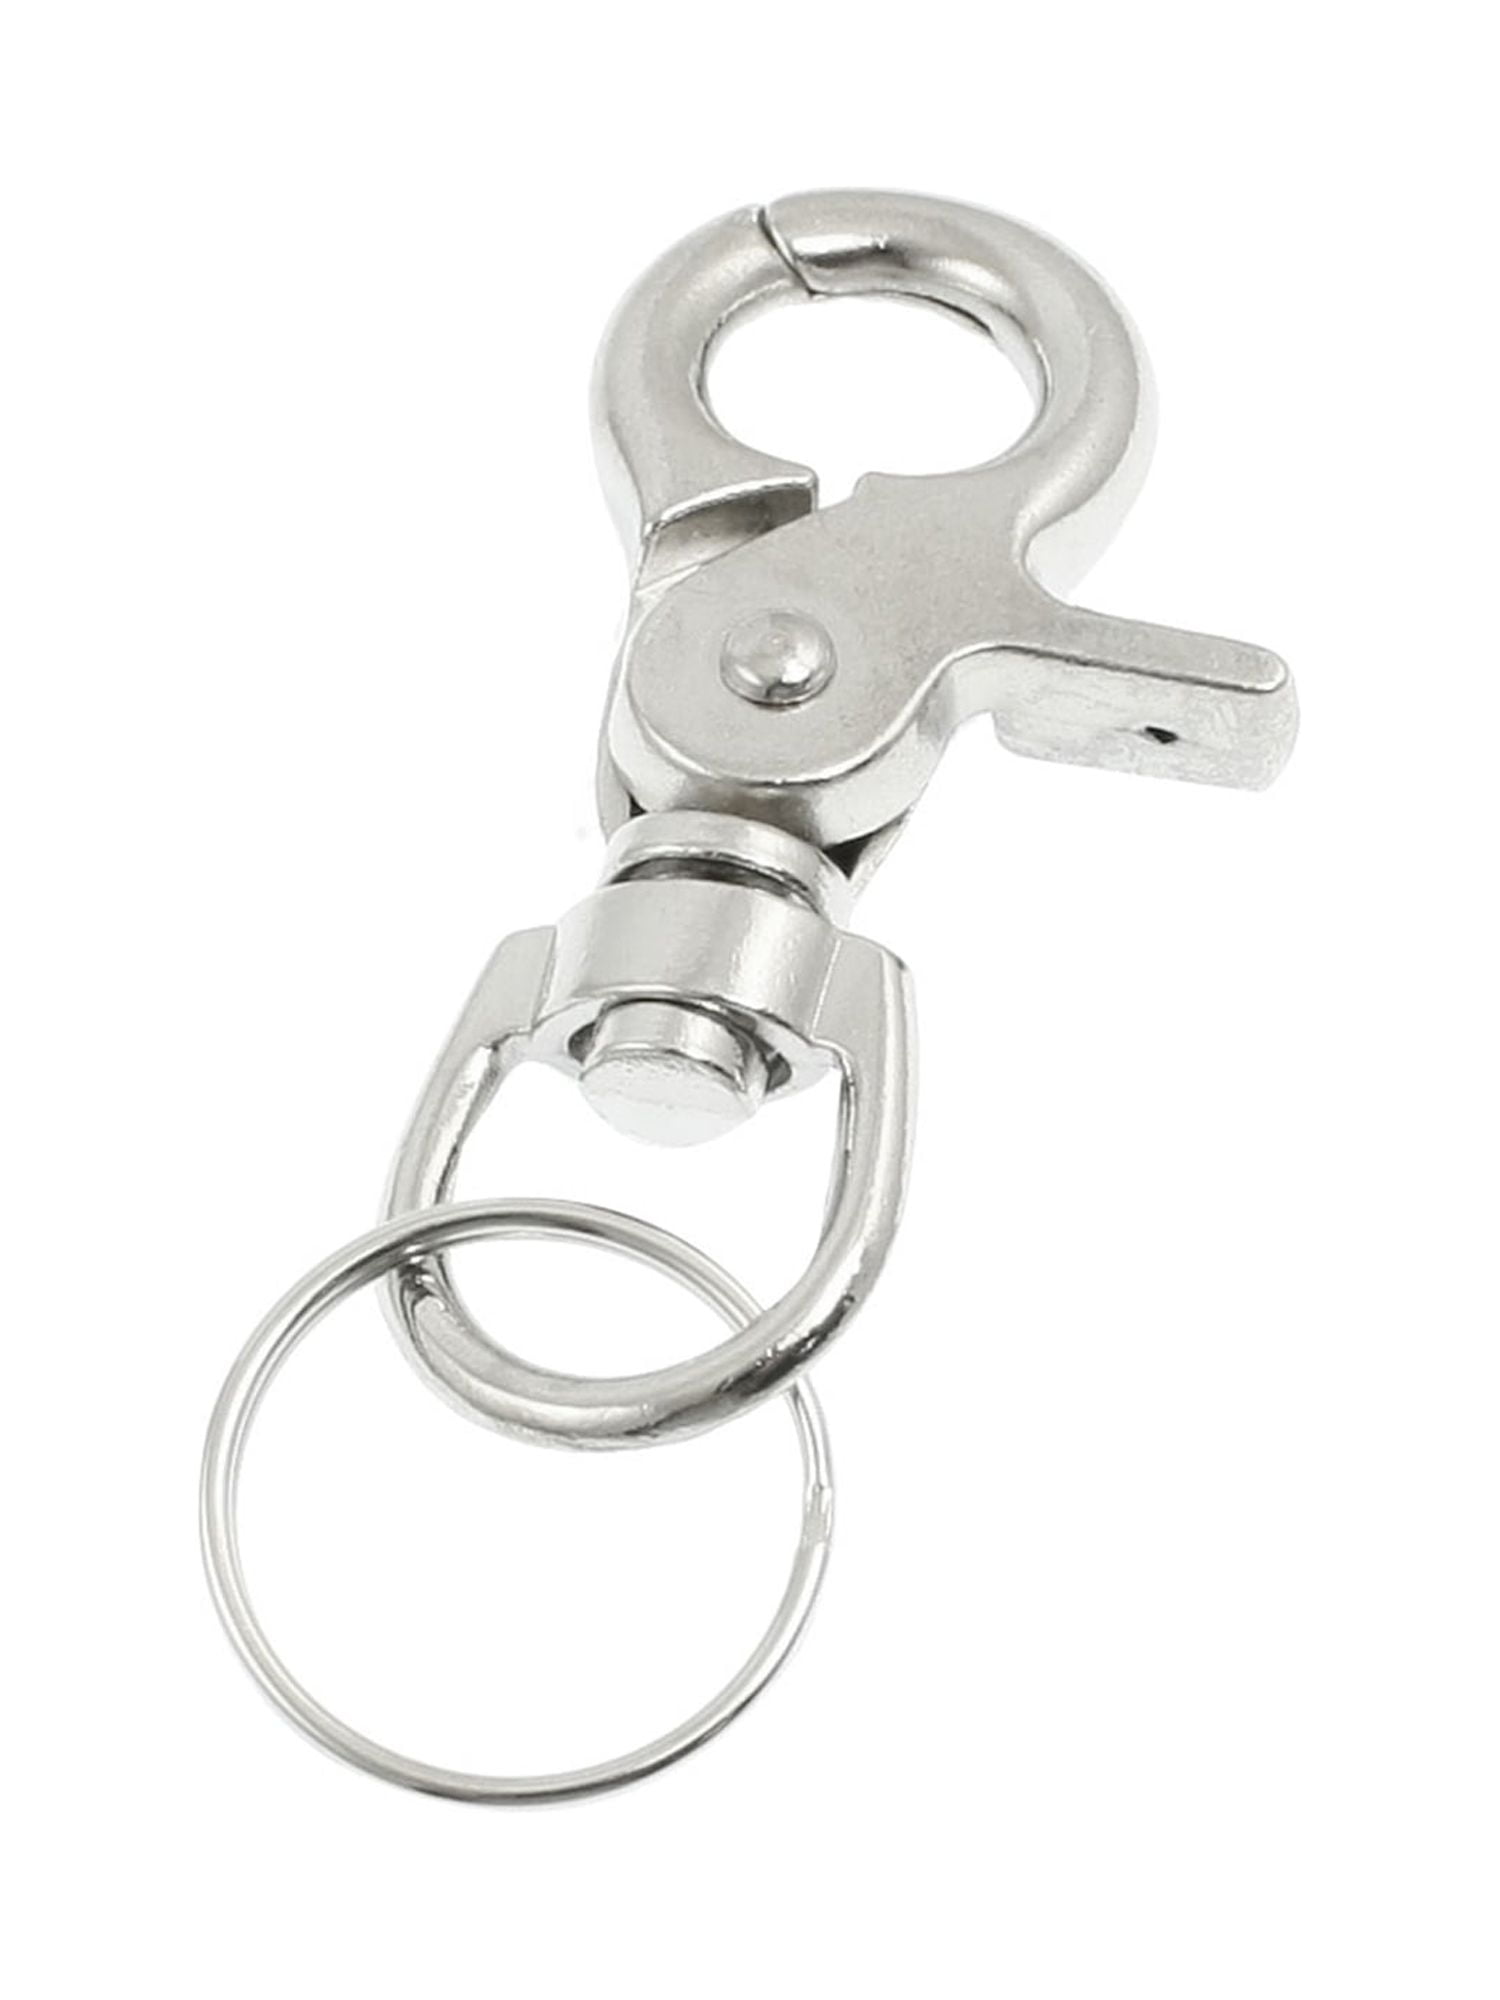 Keychains - Antique Silver - 25mm Key Ring - Gift Wrapped - Vibrant Scents